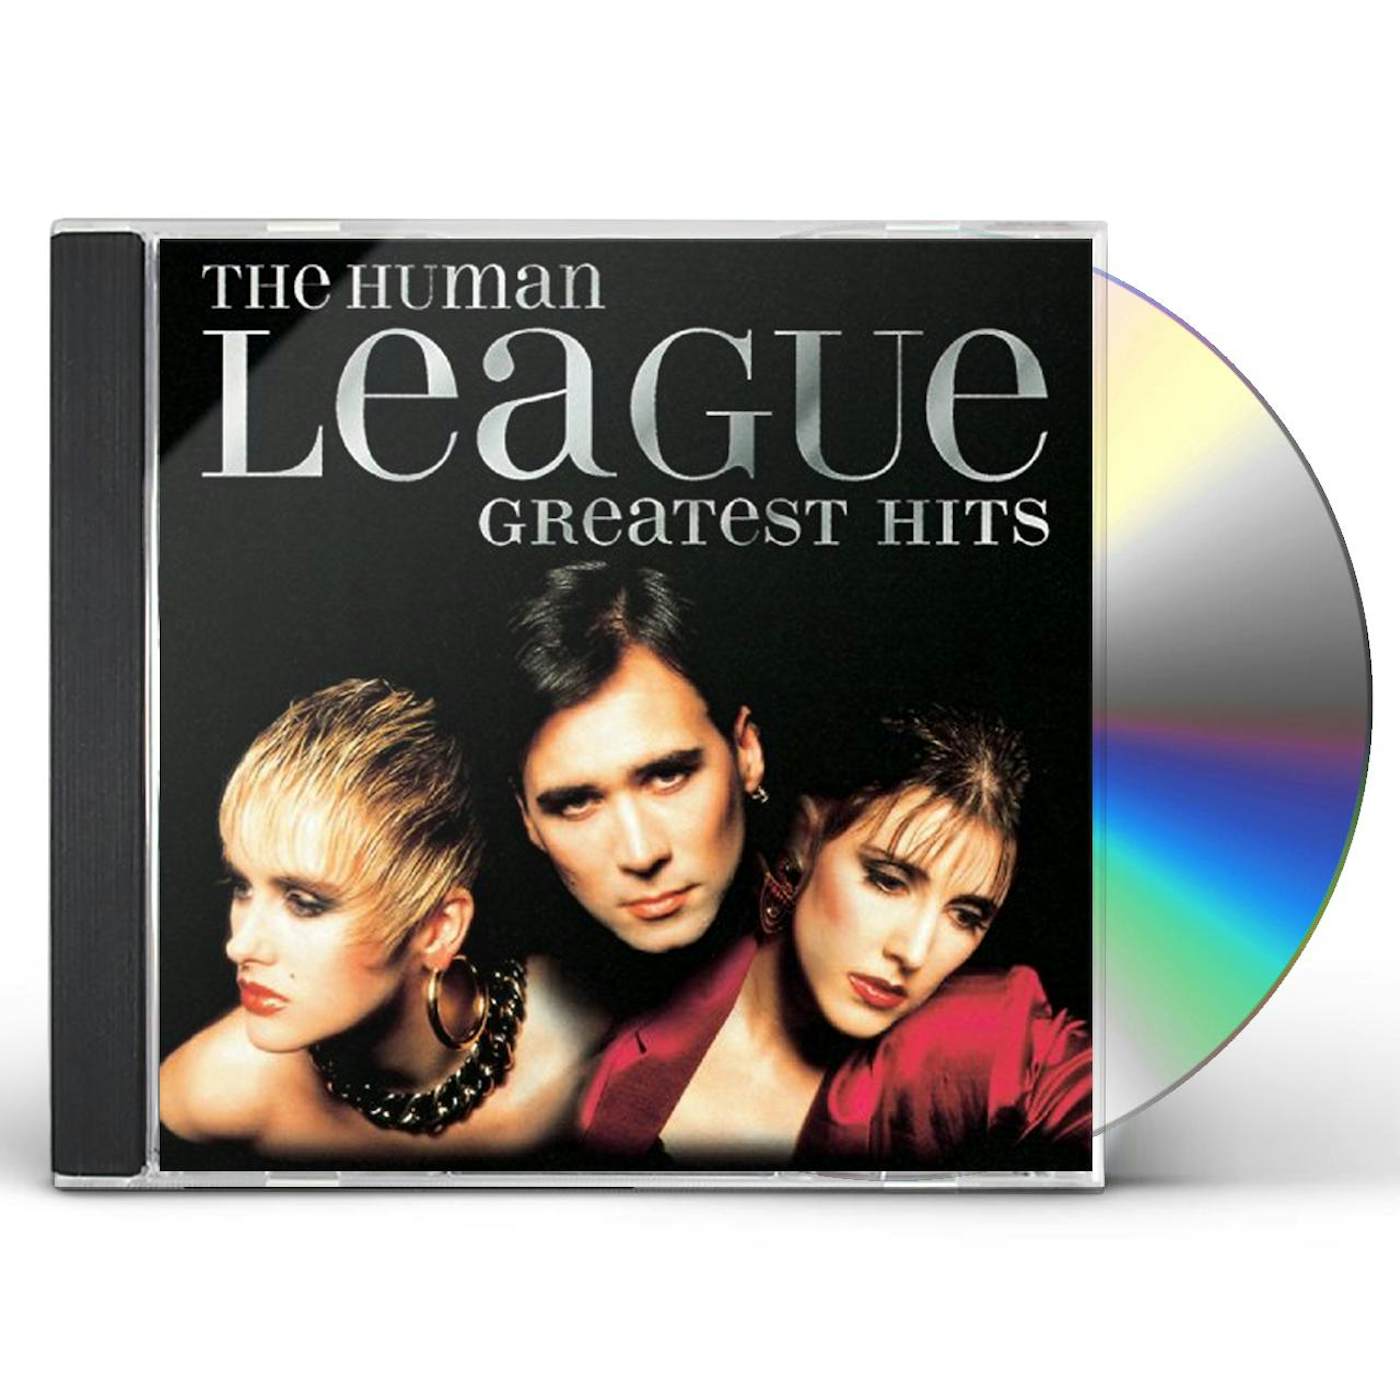 The Human League GREATEST HITS CD